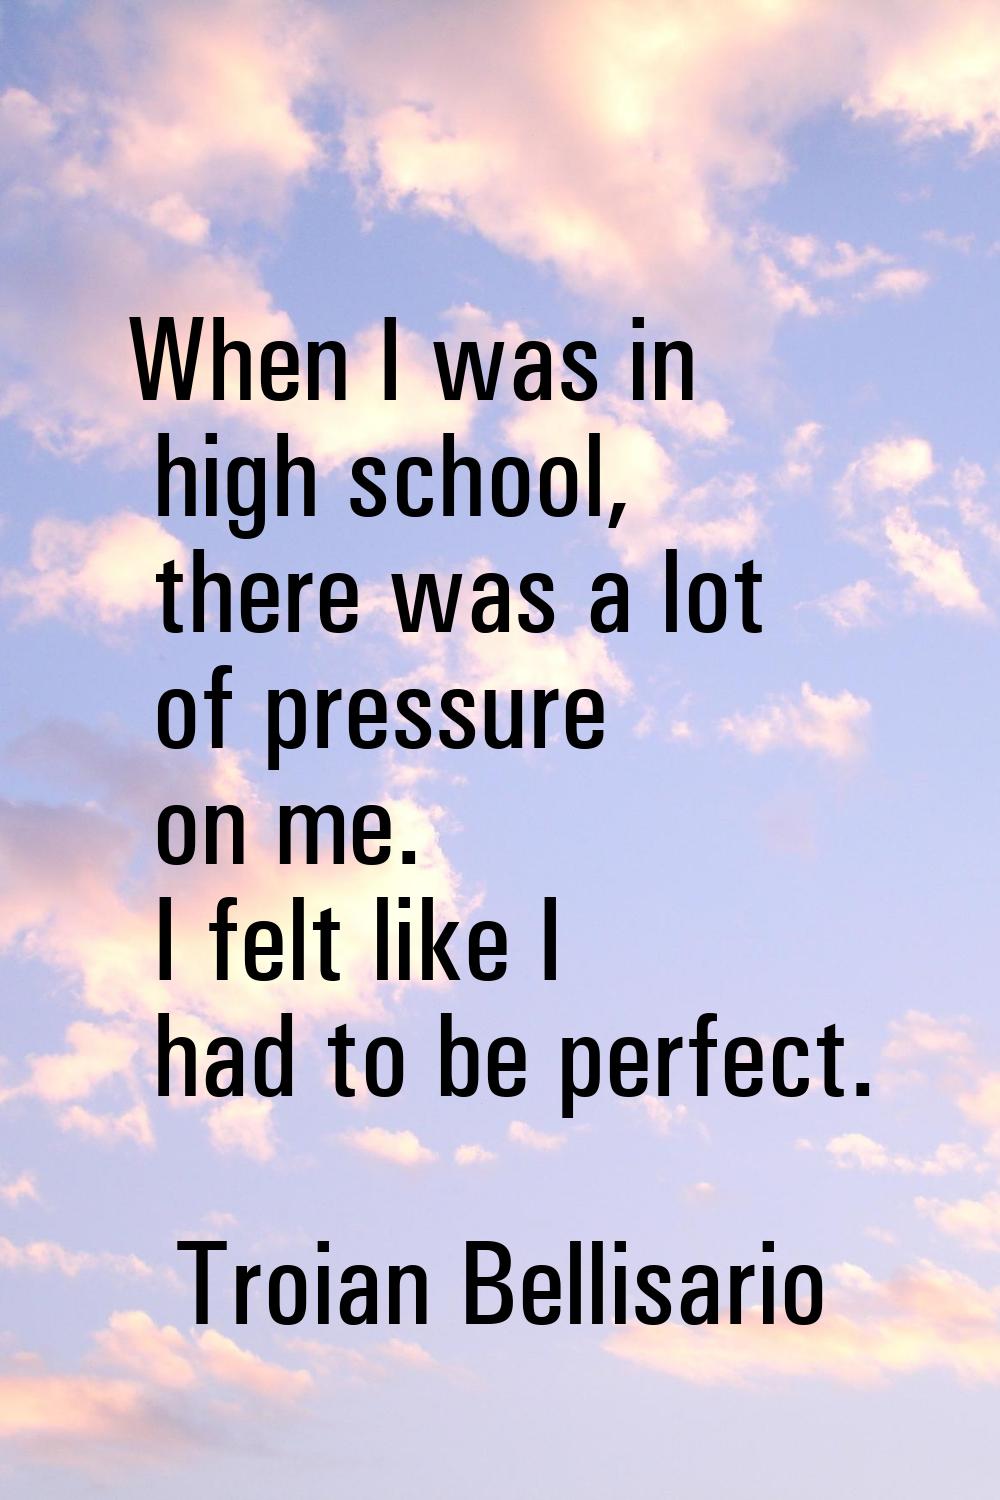 When I was in high school, there was a lot of pressure on me. I felt like I had to be perfect.